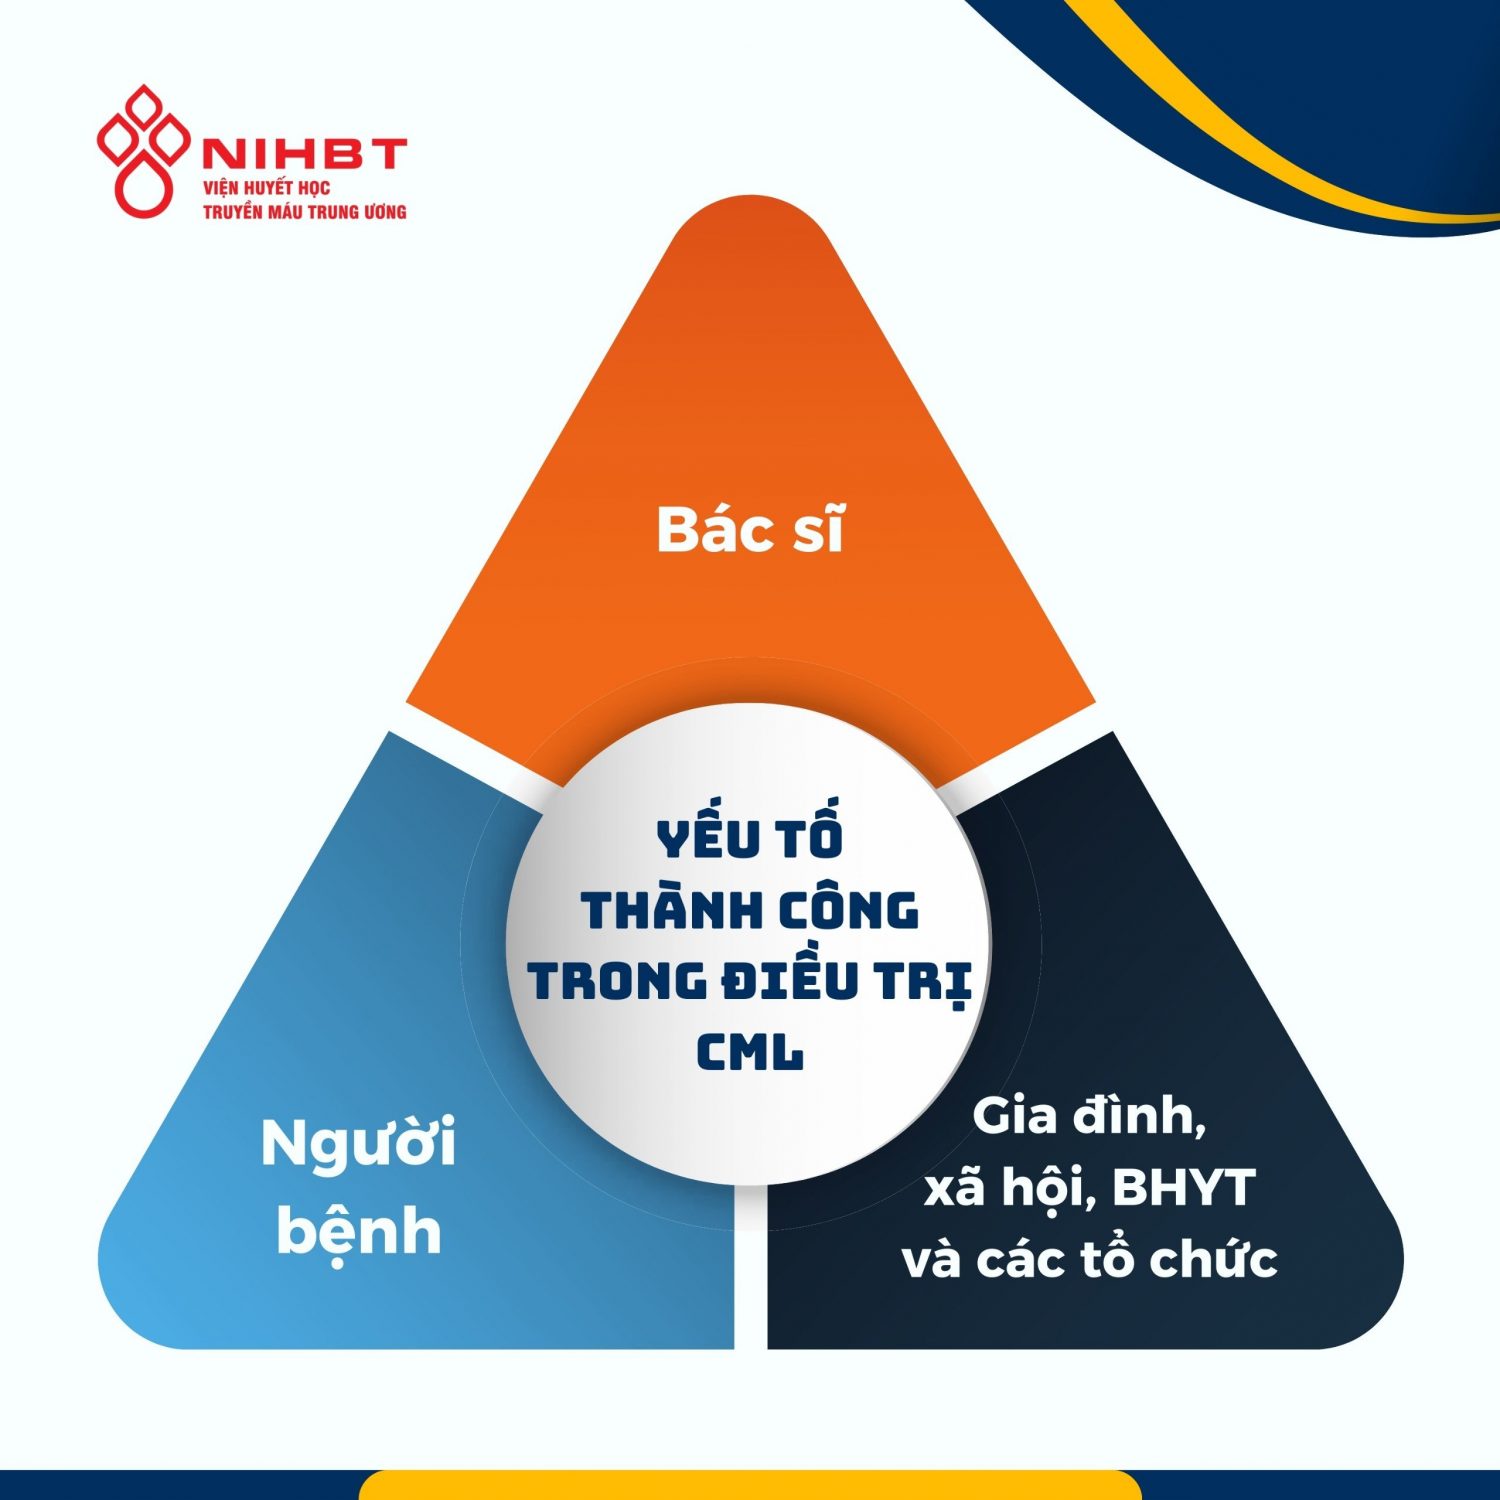 Yeu to quyet dinh thanh cong dieu tri CML (2)